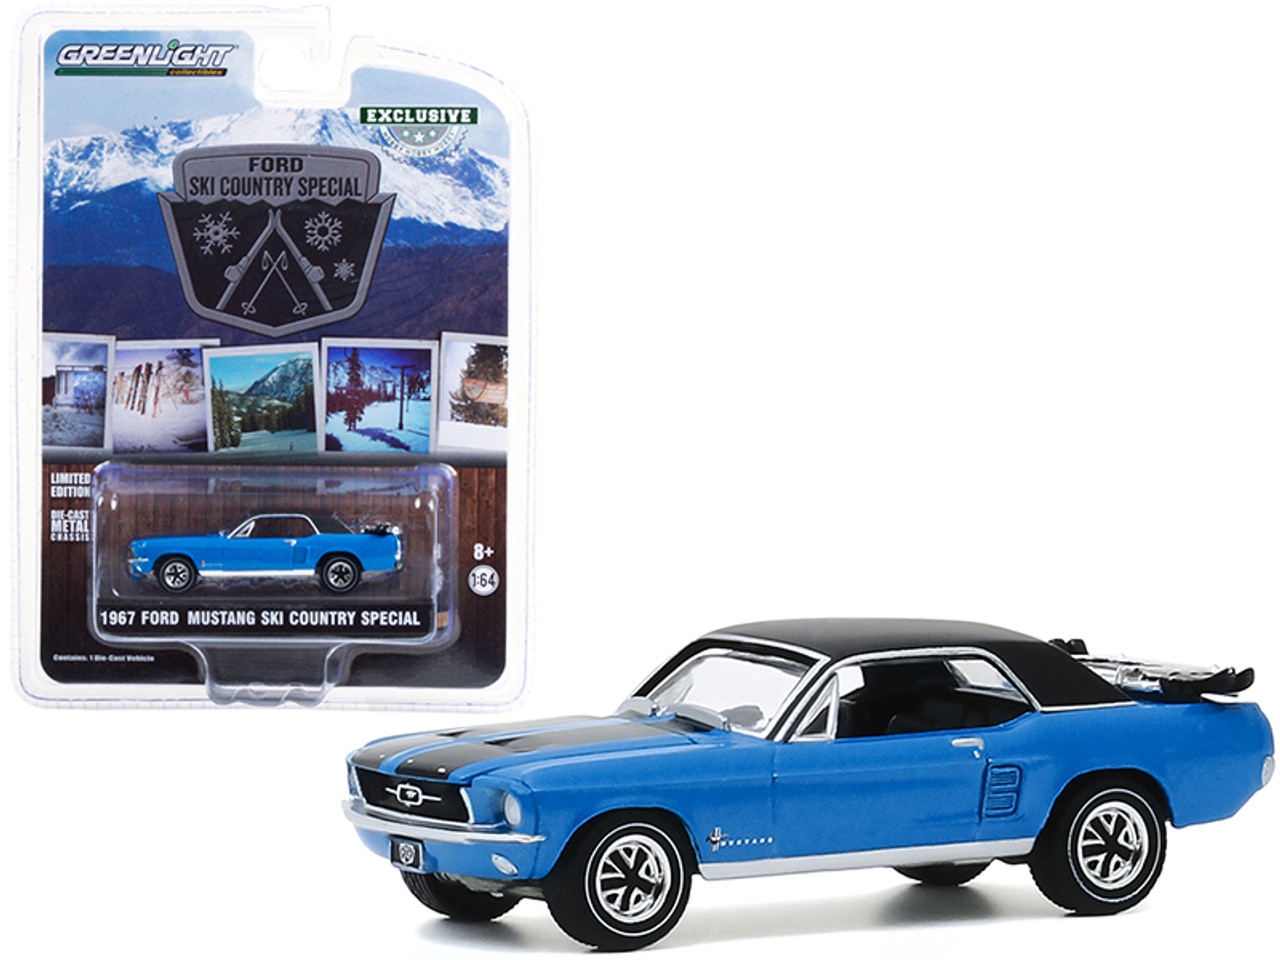 1967 Ford Mustang Vail Blue with Black Stripes and Top and a Pair of Skis "Ski Country Special" "Hobby Exclusive" 1/64 Diecast Model Car by Greenlight